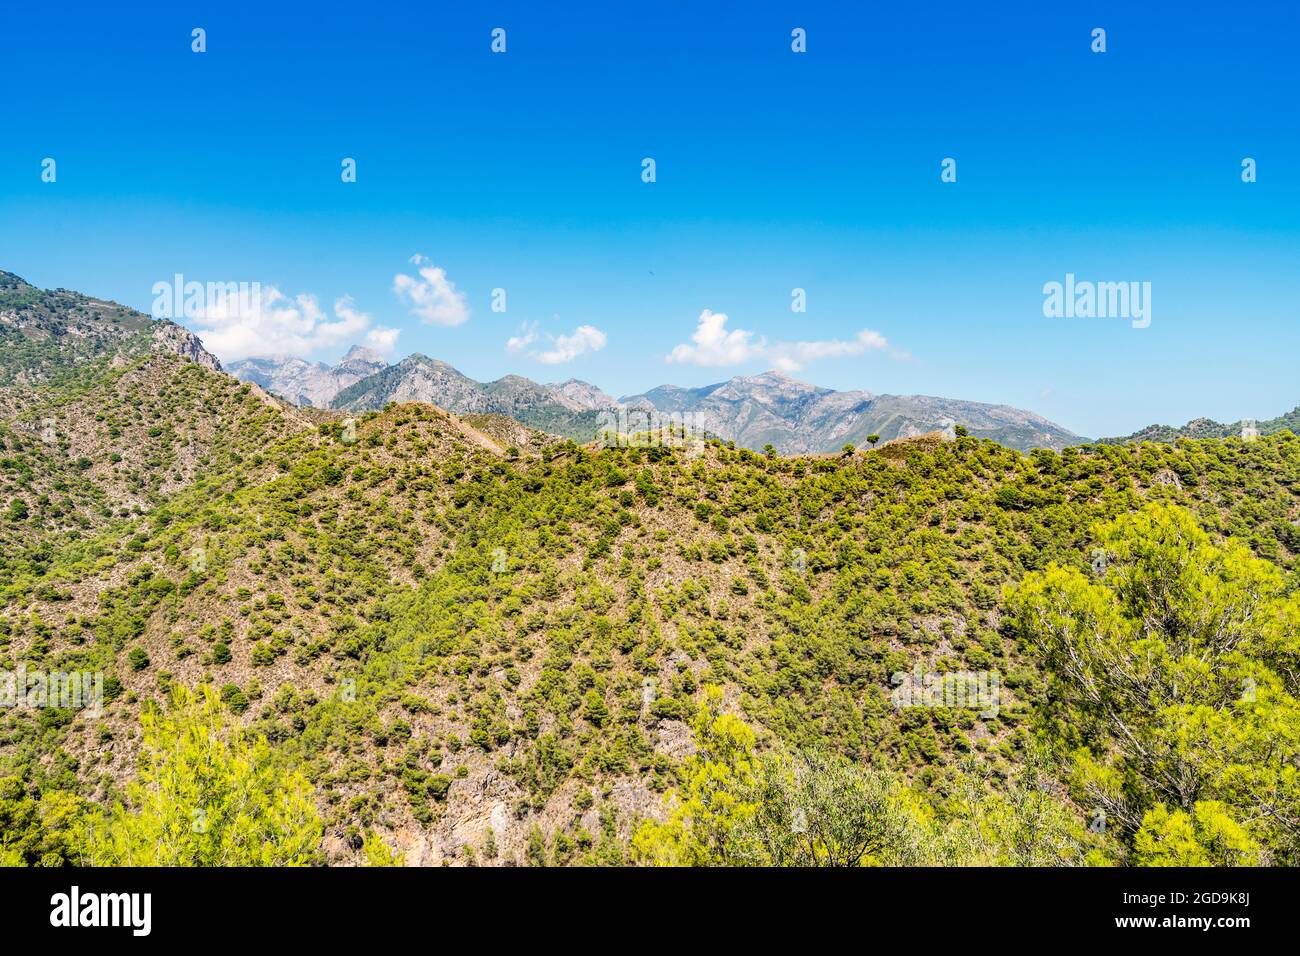 Landscape of mountains Tejeda, Almijara and Alhama in Natural Park, Andalusia, Spain, Europe Stock Photo